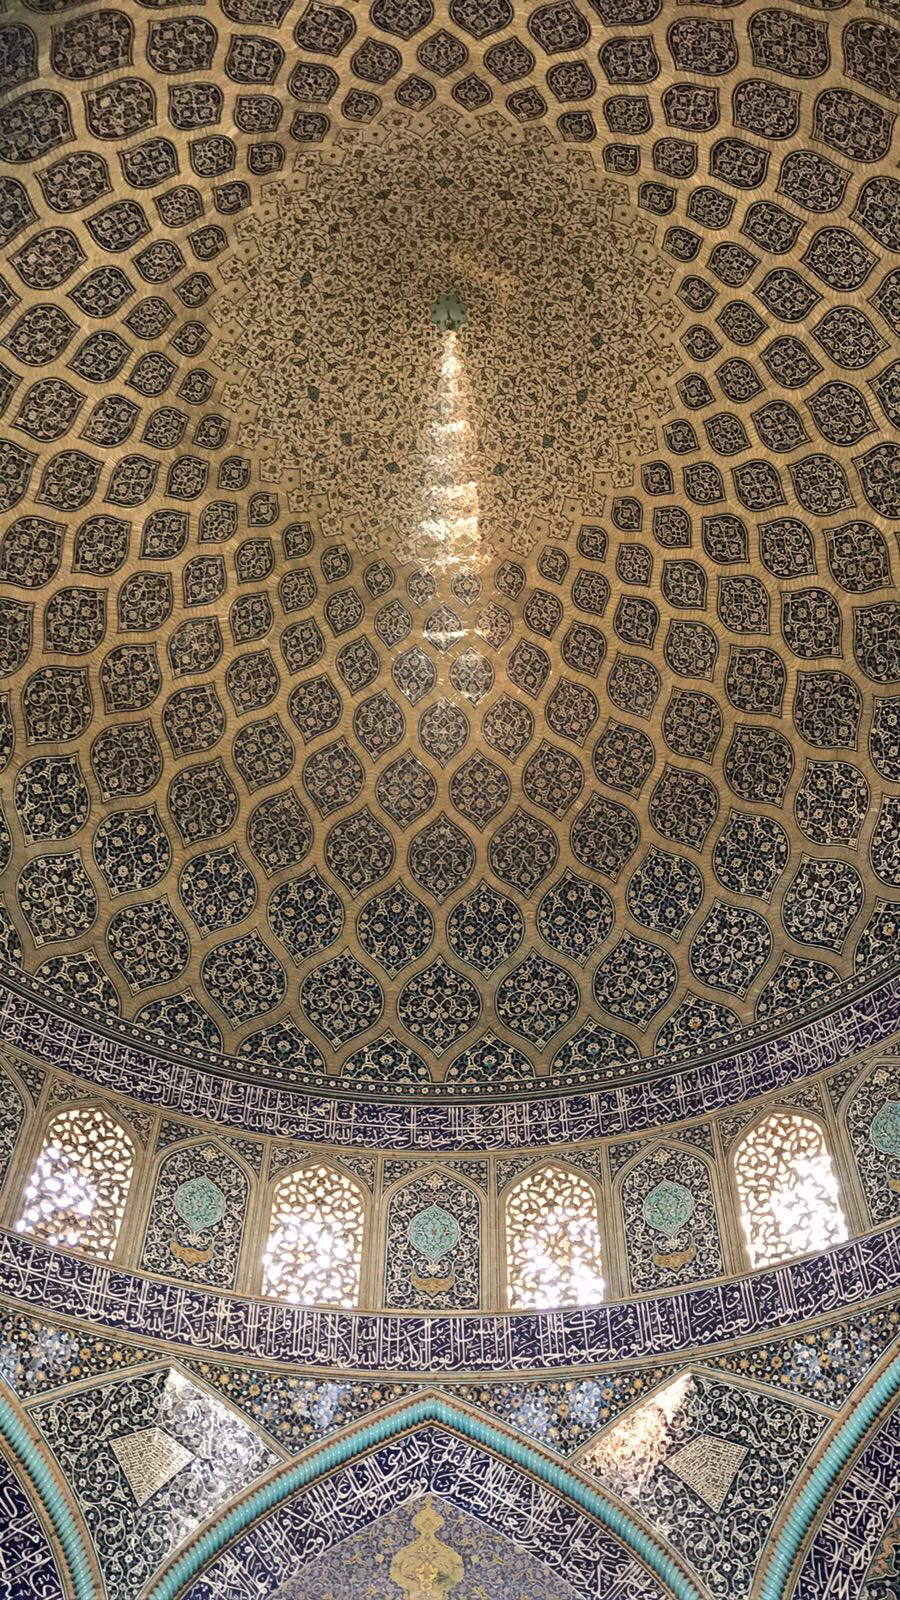 Interior of the dome of the Sheikh Lotfollah Mosque, Isfahan